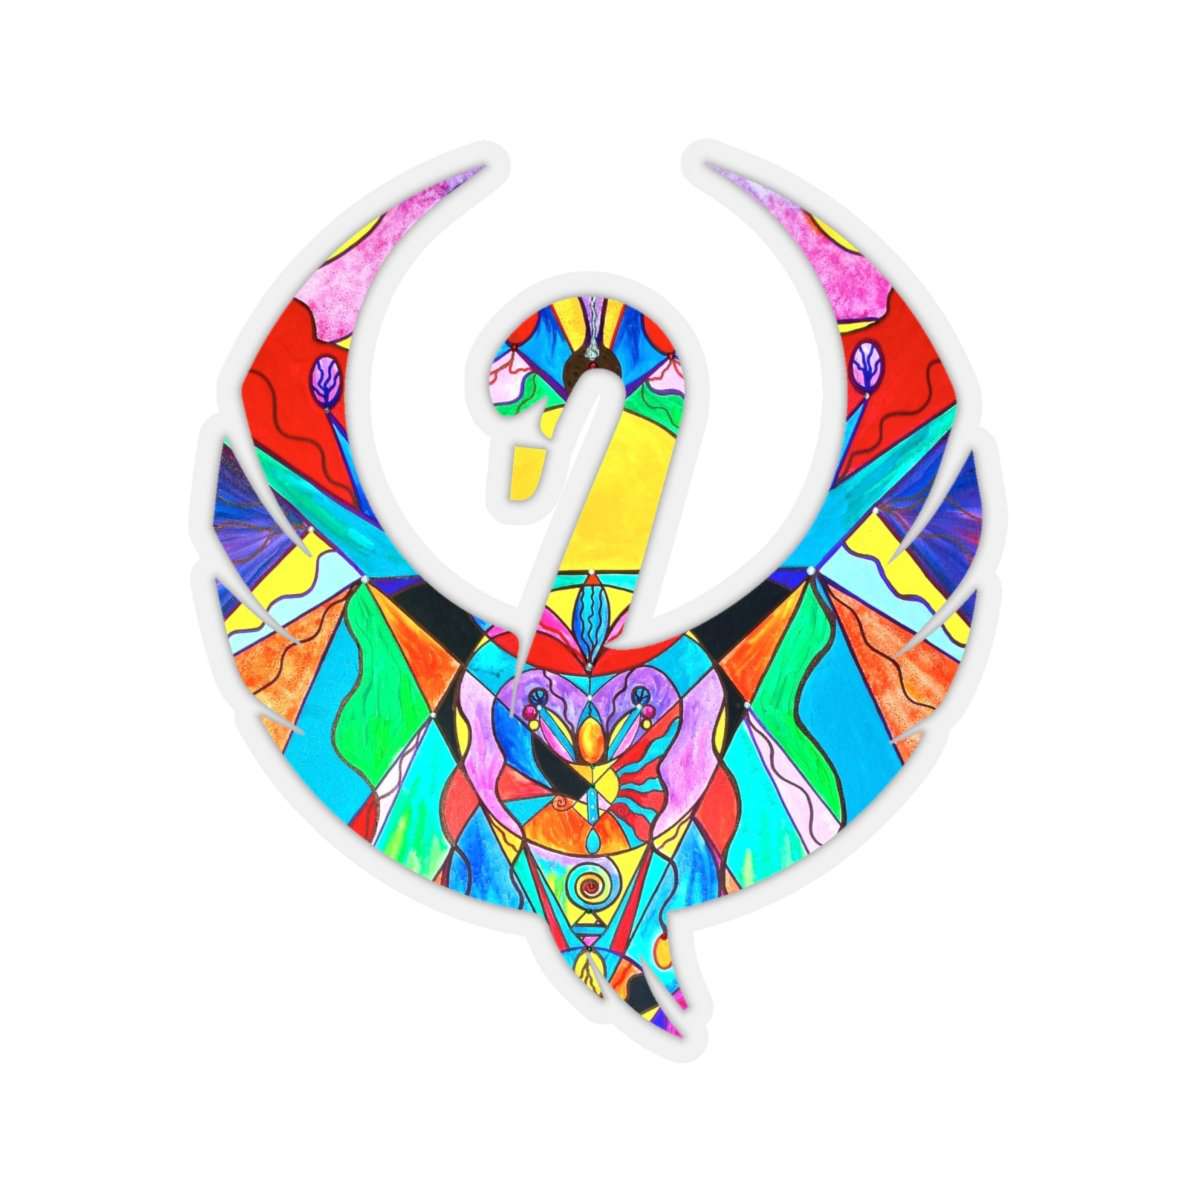 we-are-the-best-place-to-shop-arcturian-metamorphosis-grid-swan-stickers-sale_4.jpg